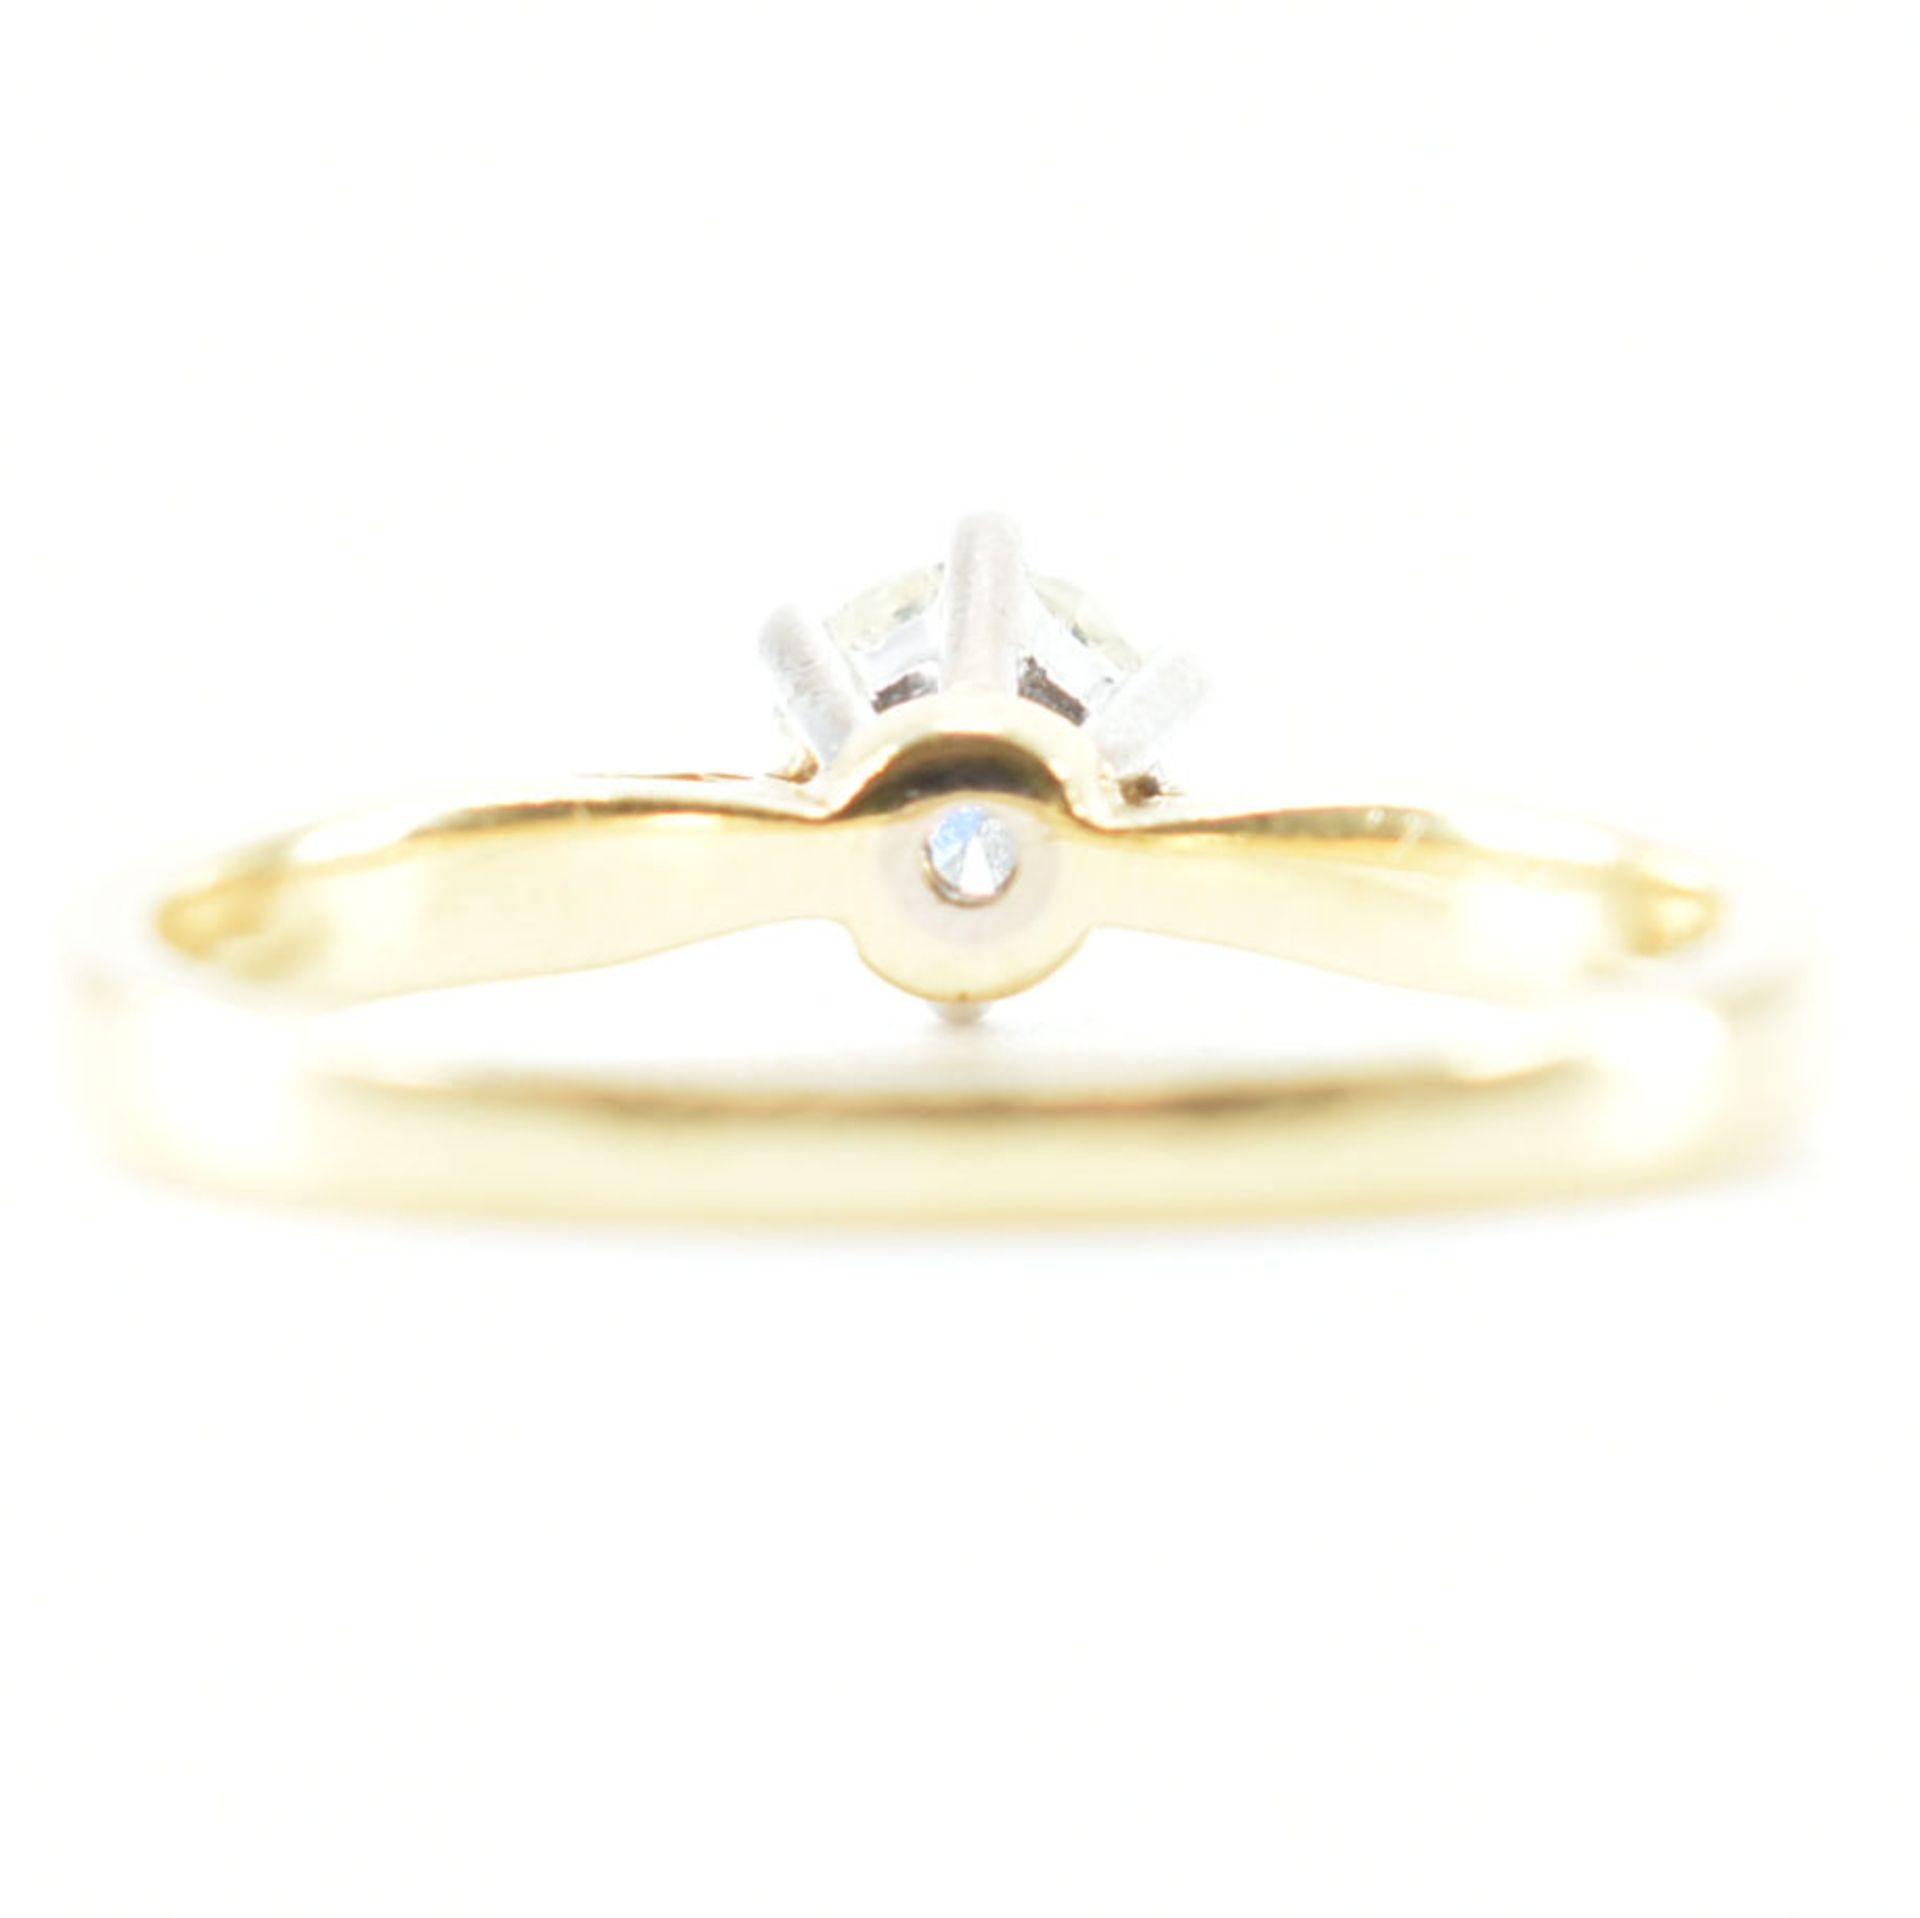 HALLMARKED 18CT GOLD & DIAMOND SOLITAIRE RING - Image 4 of 11